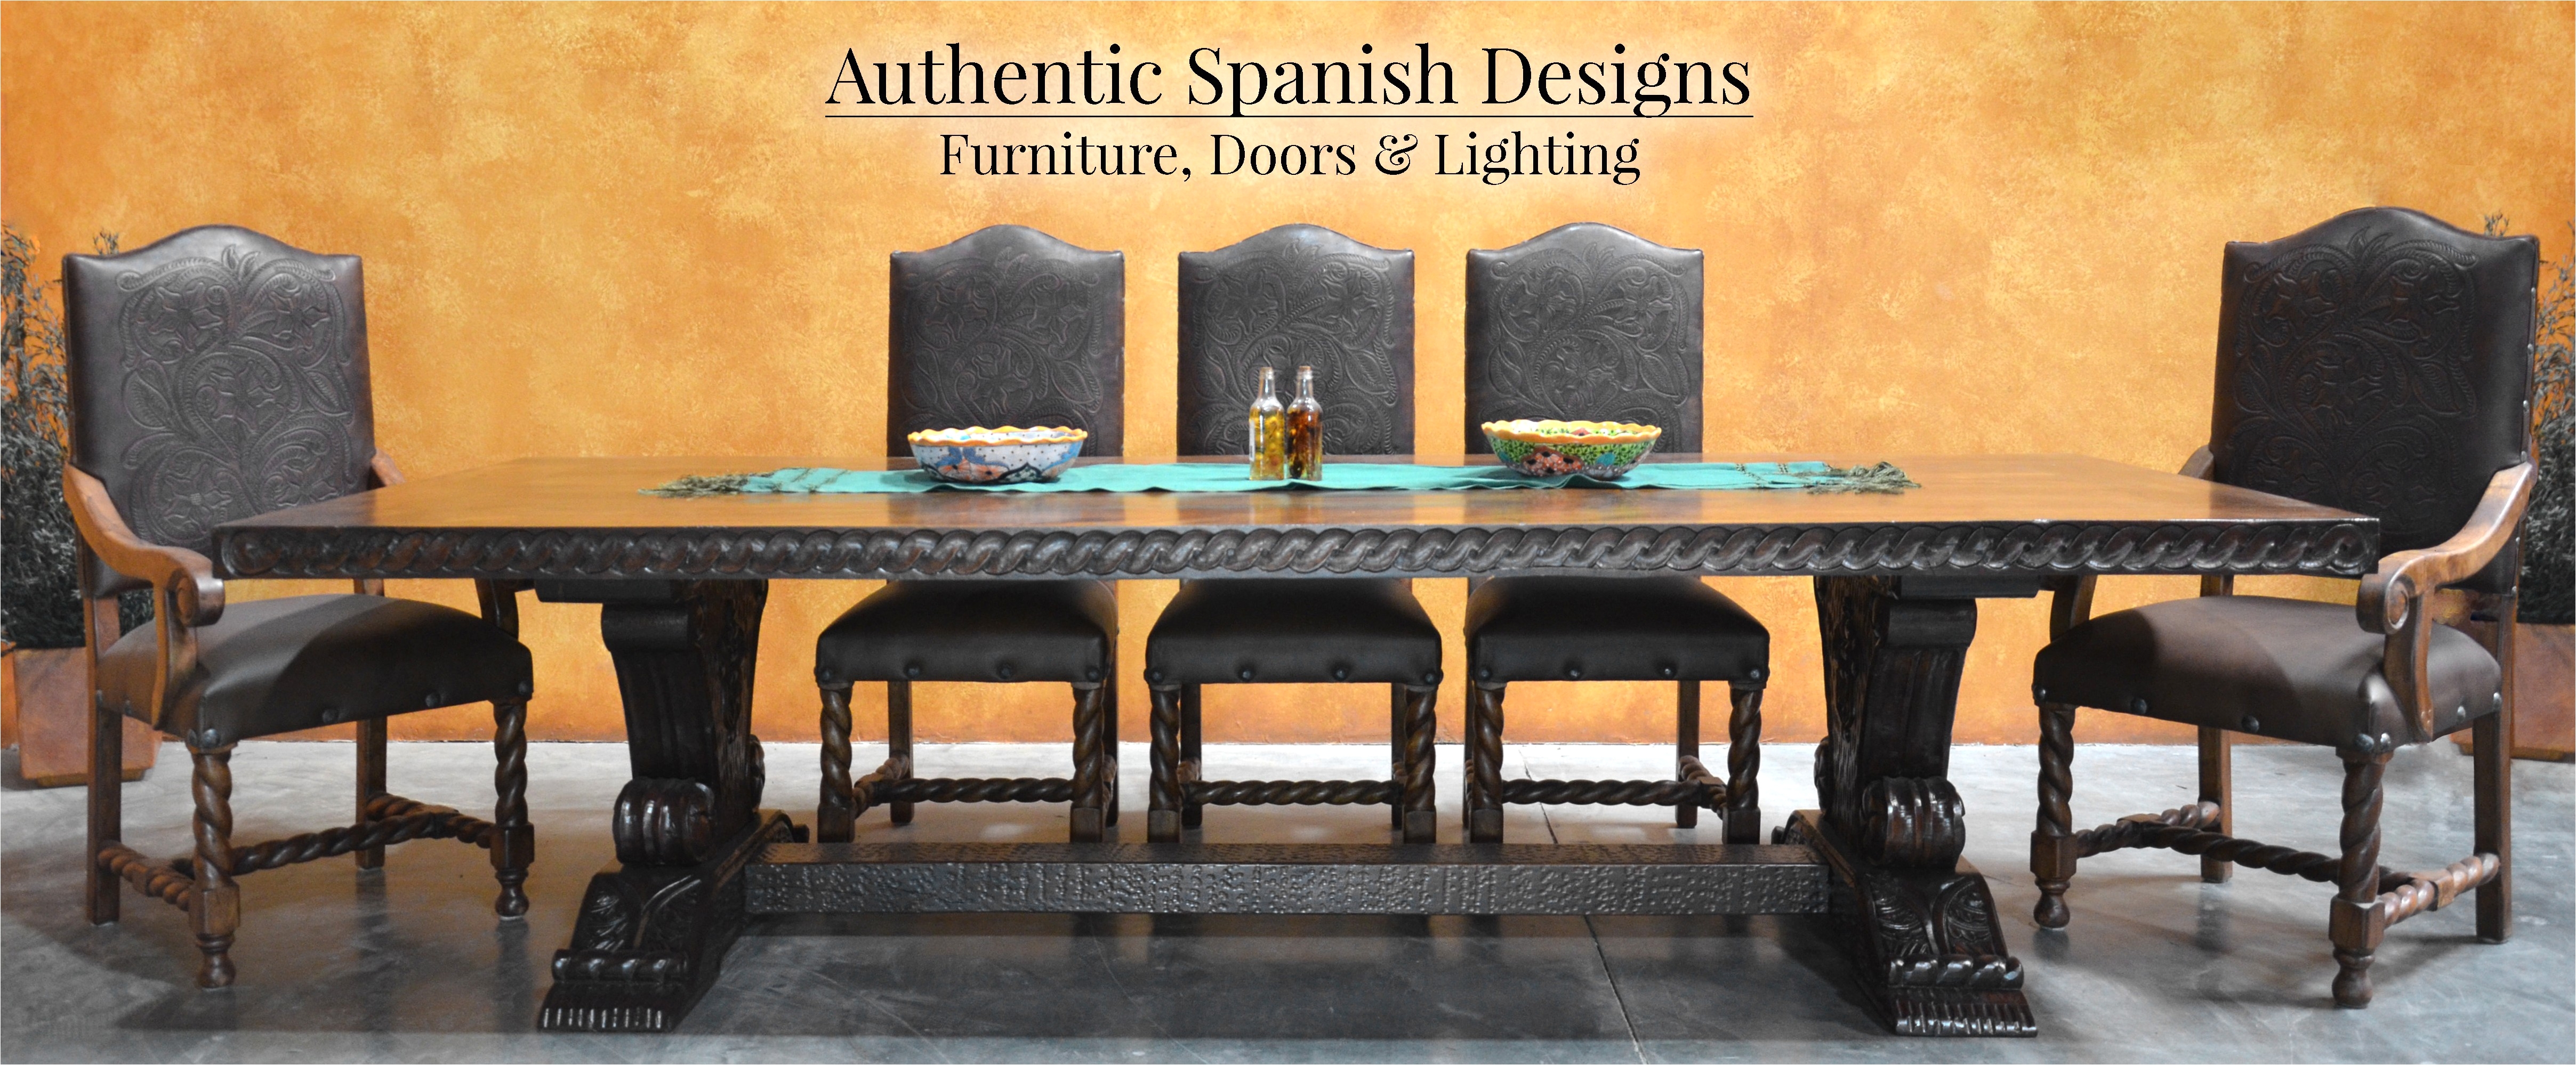 used dining table and chairs sale new spanish style furniture doors amp lighting demejico los angeles